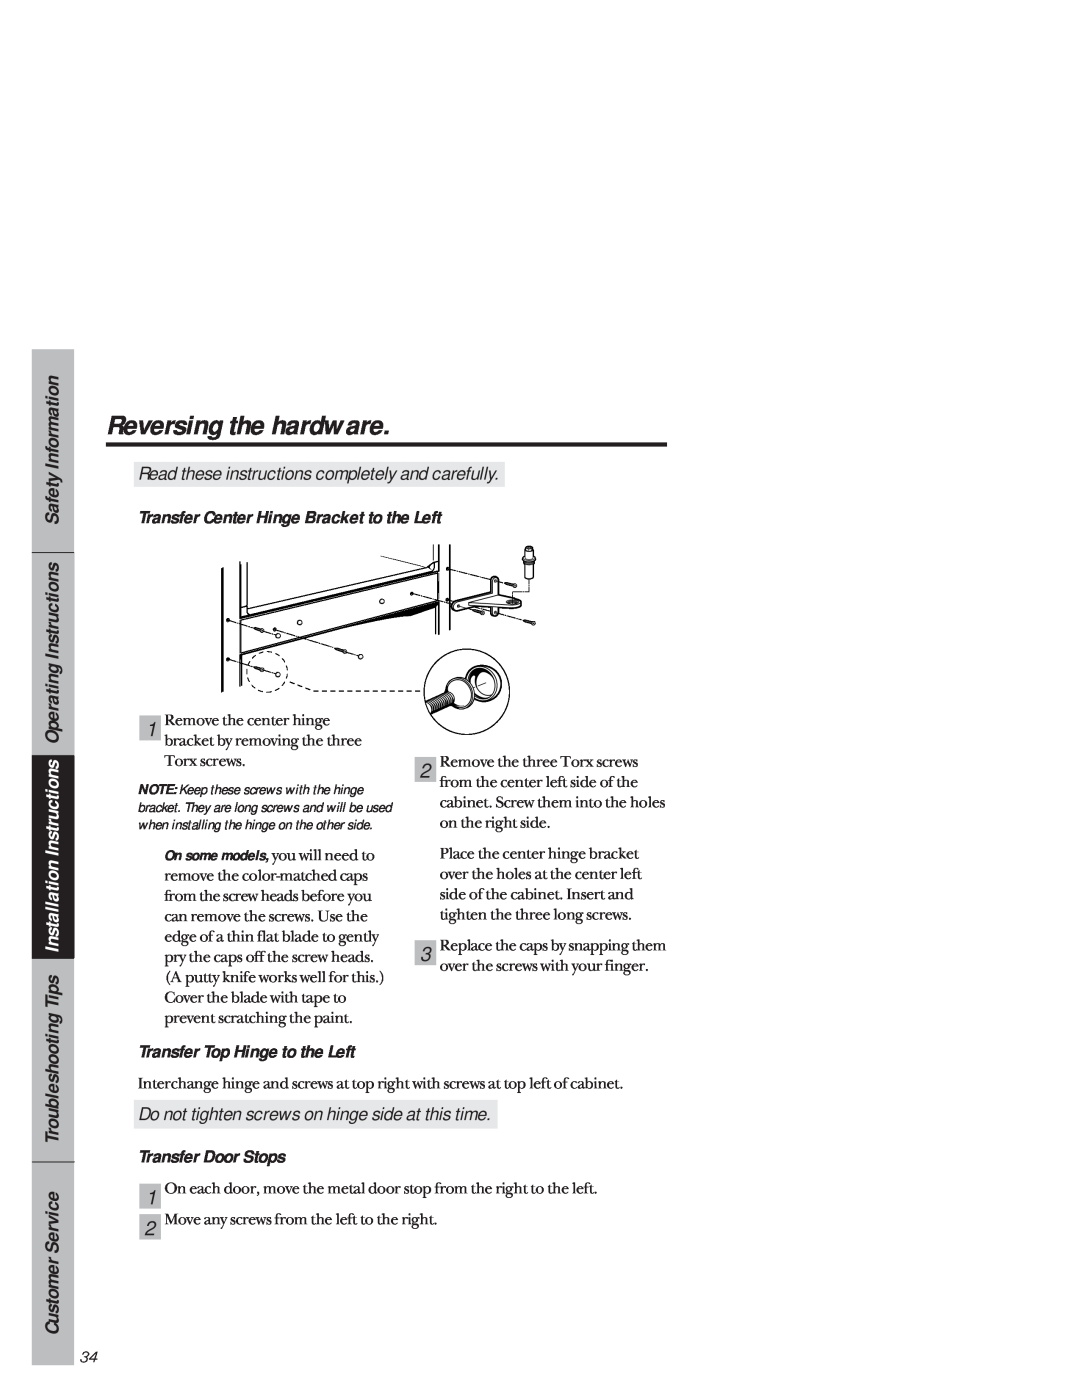 GE 1825 Tips Installation Instructions, Operating Instructions Safety Information, Transfer Top Hinge to the Left 